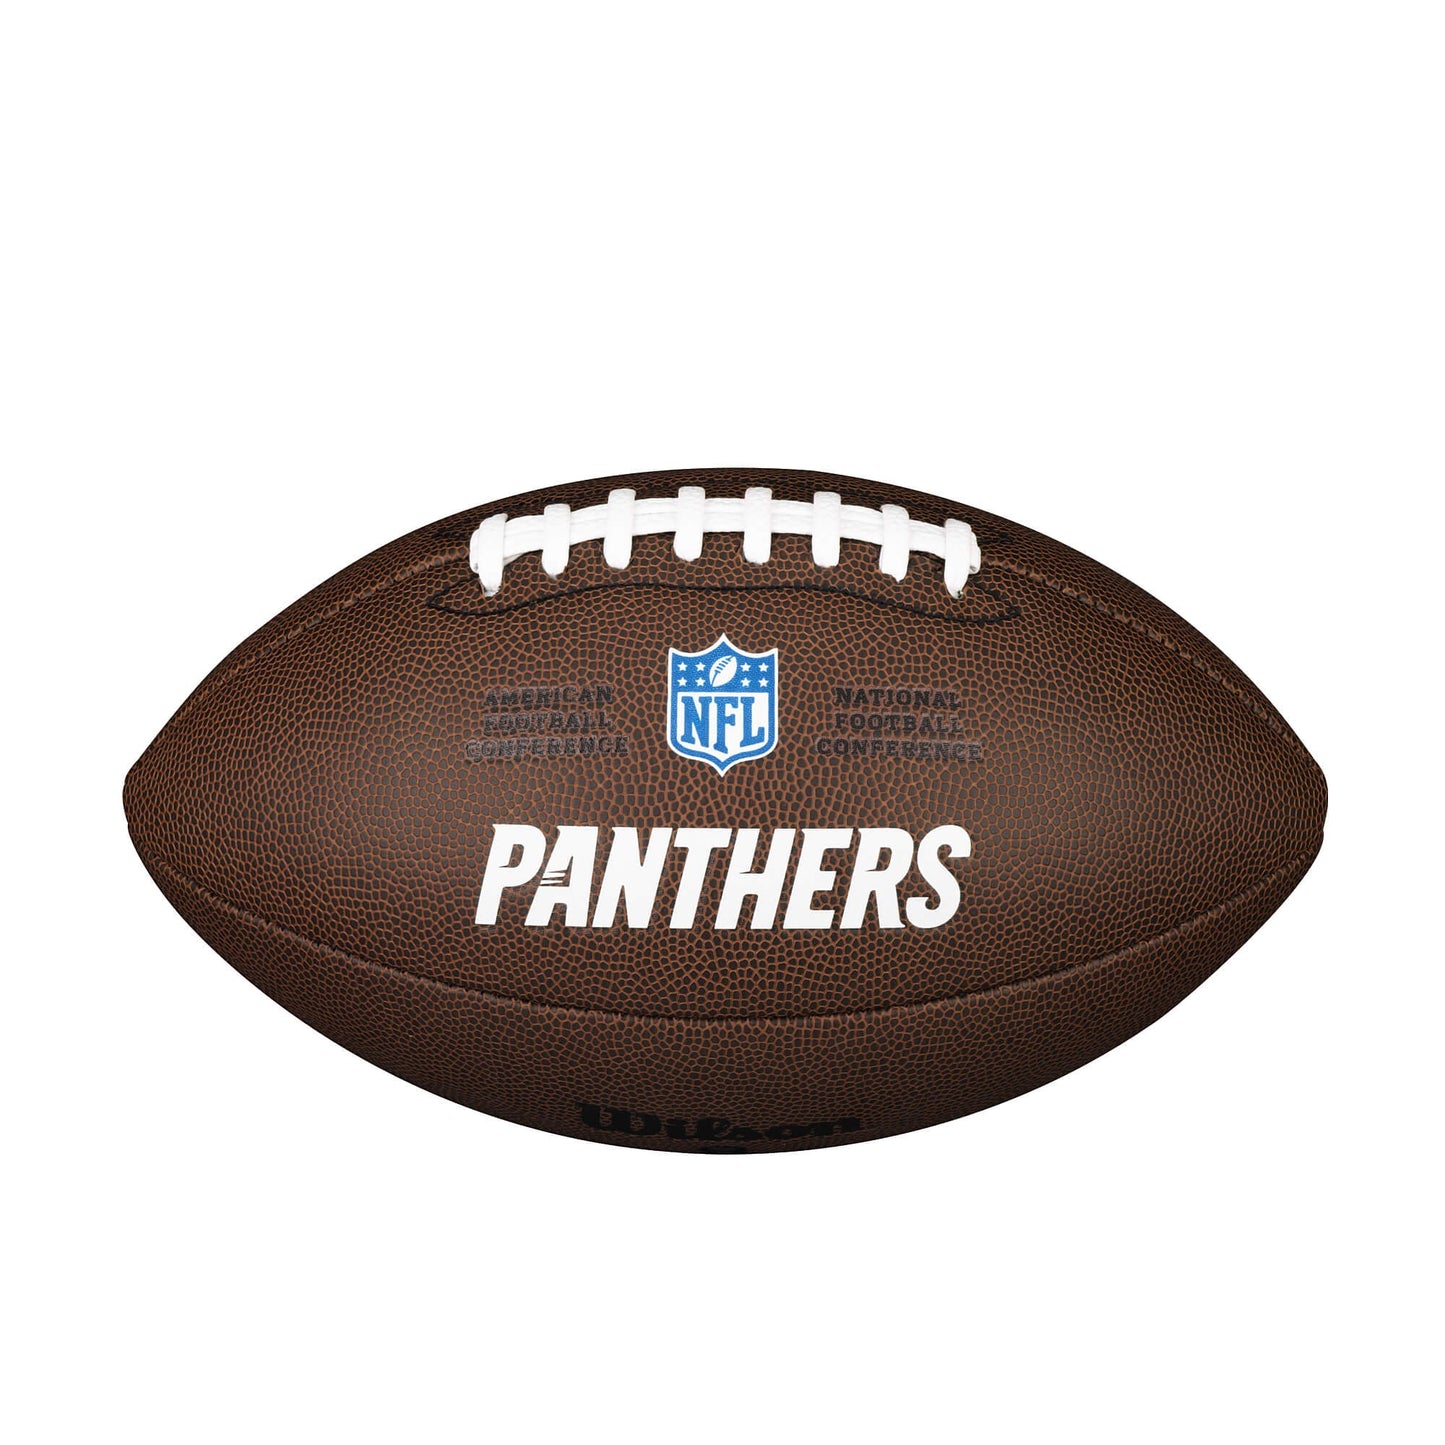 Wilson NFL Licensed Football Carolina Panthers (Sz. Official)